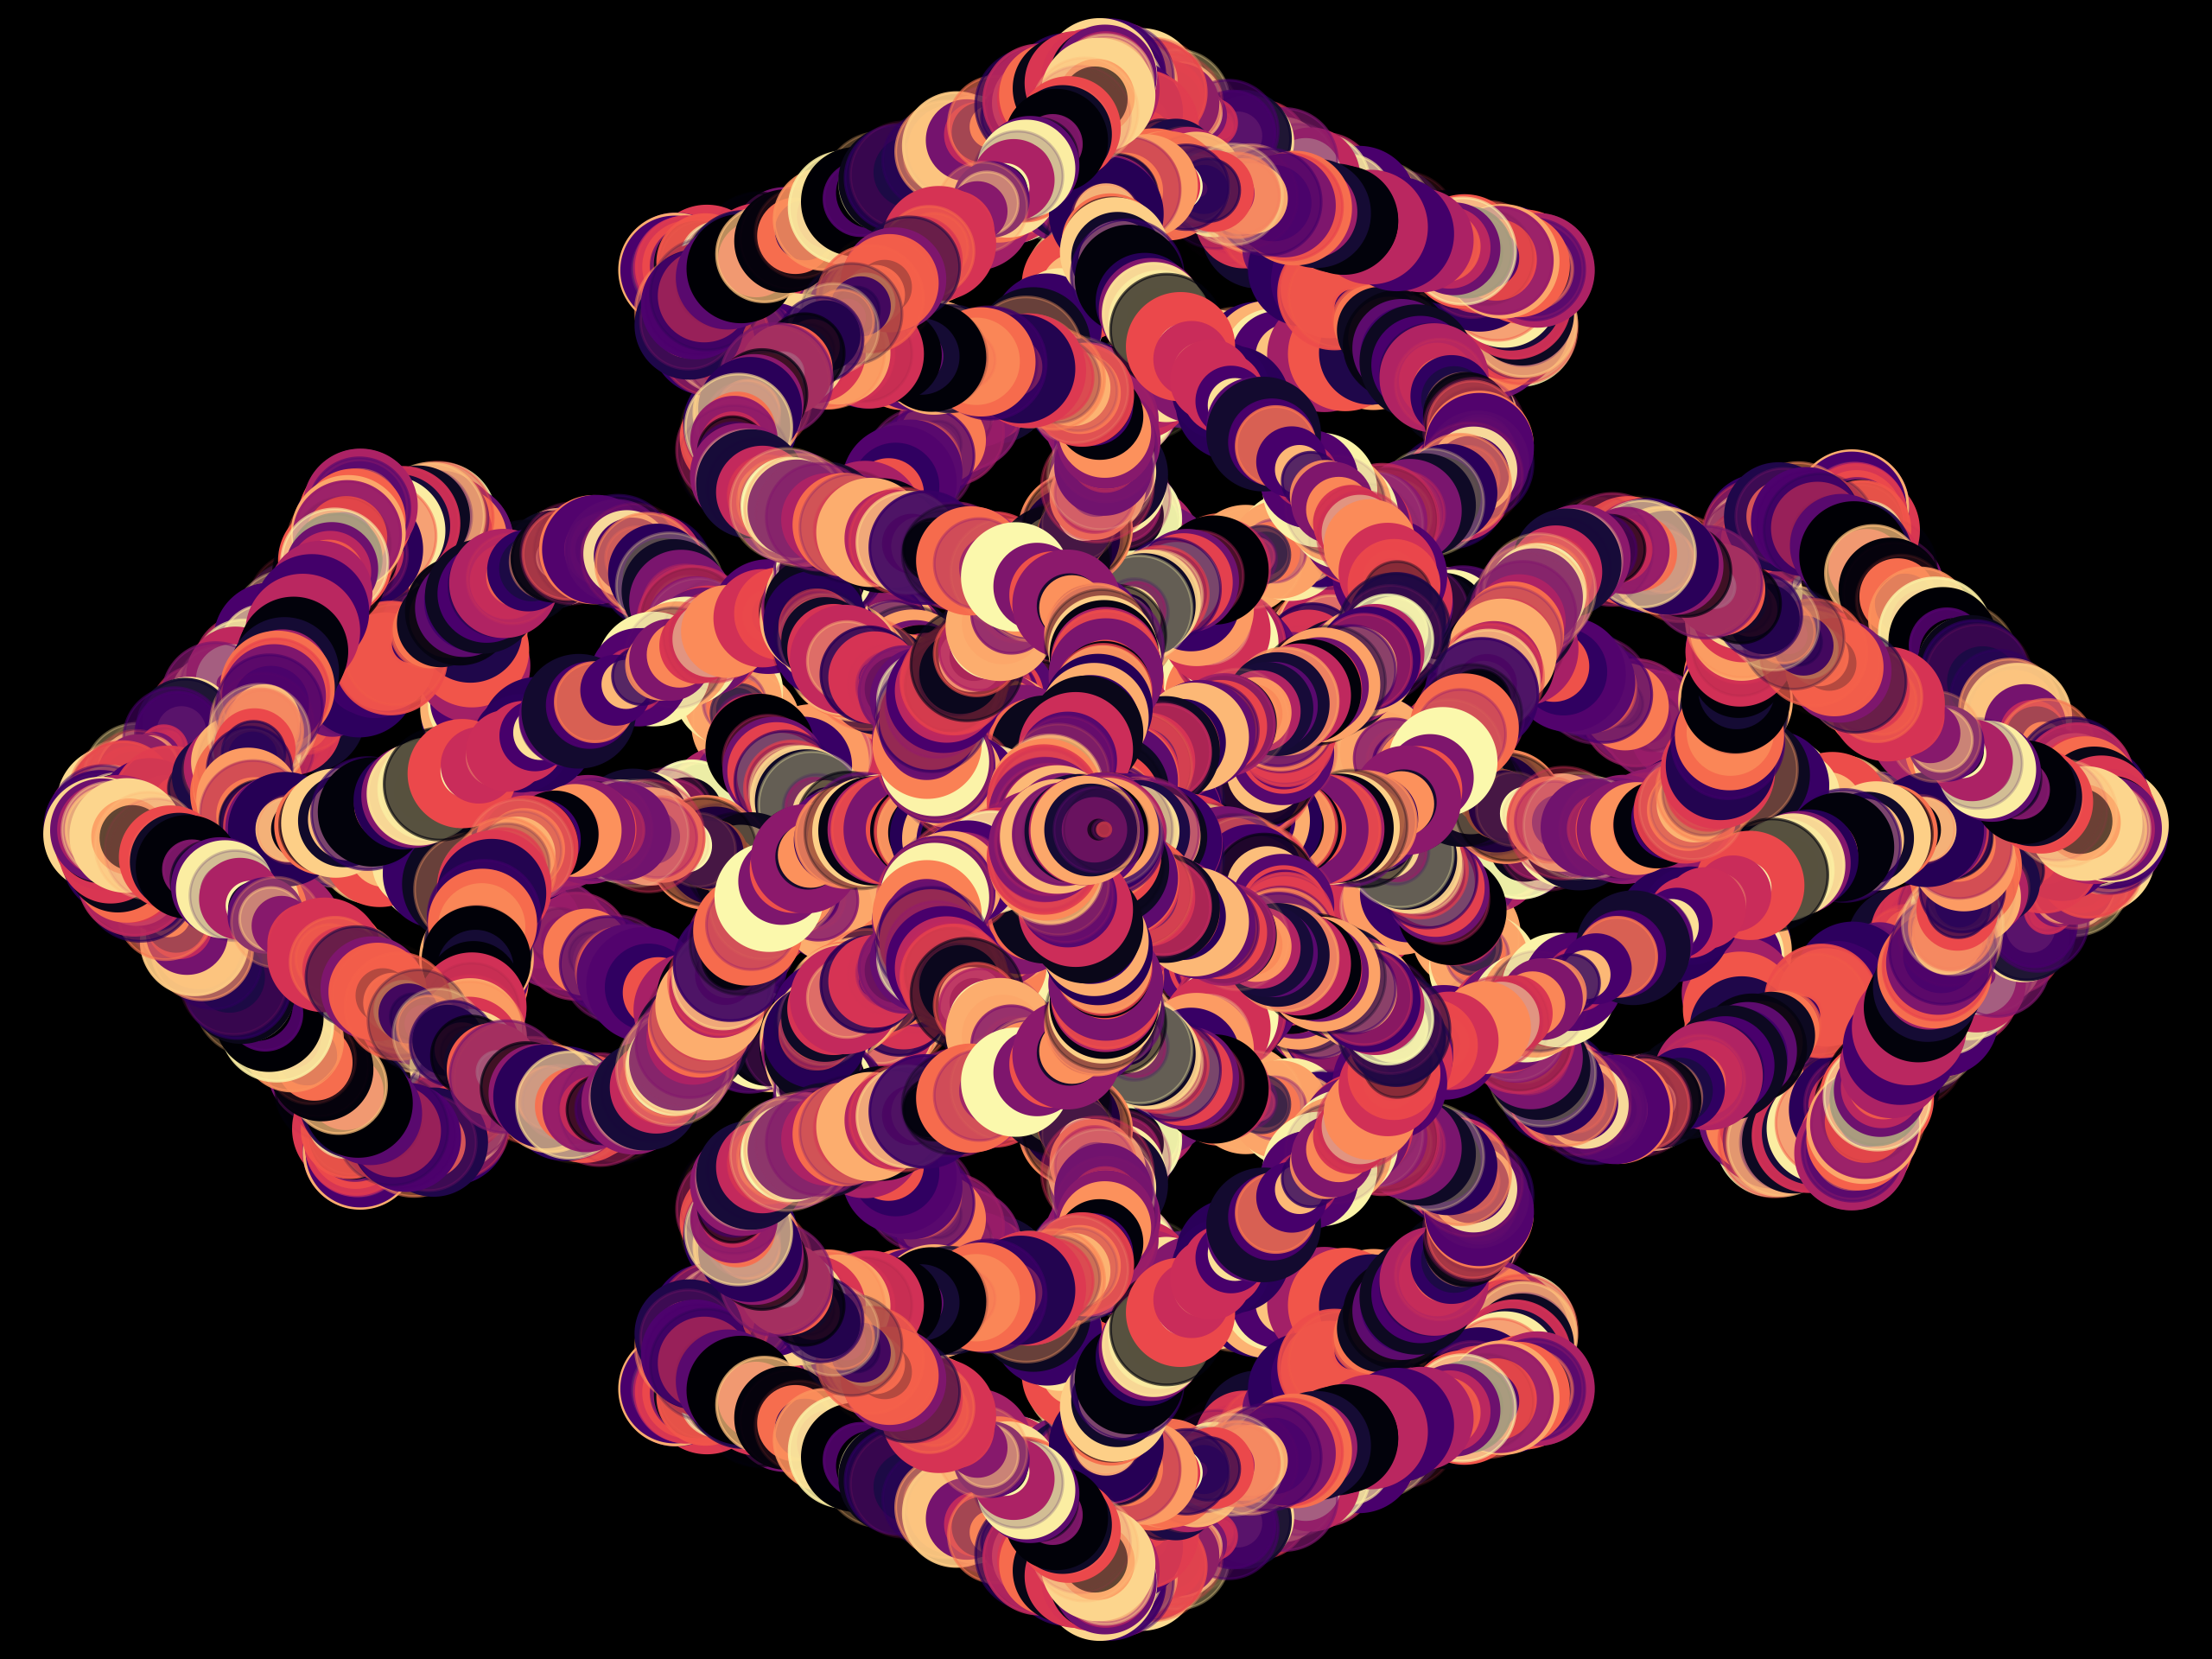 Generative art showing a repeated parametric equation